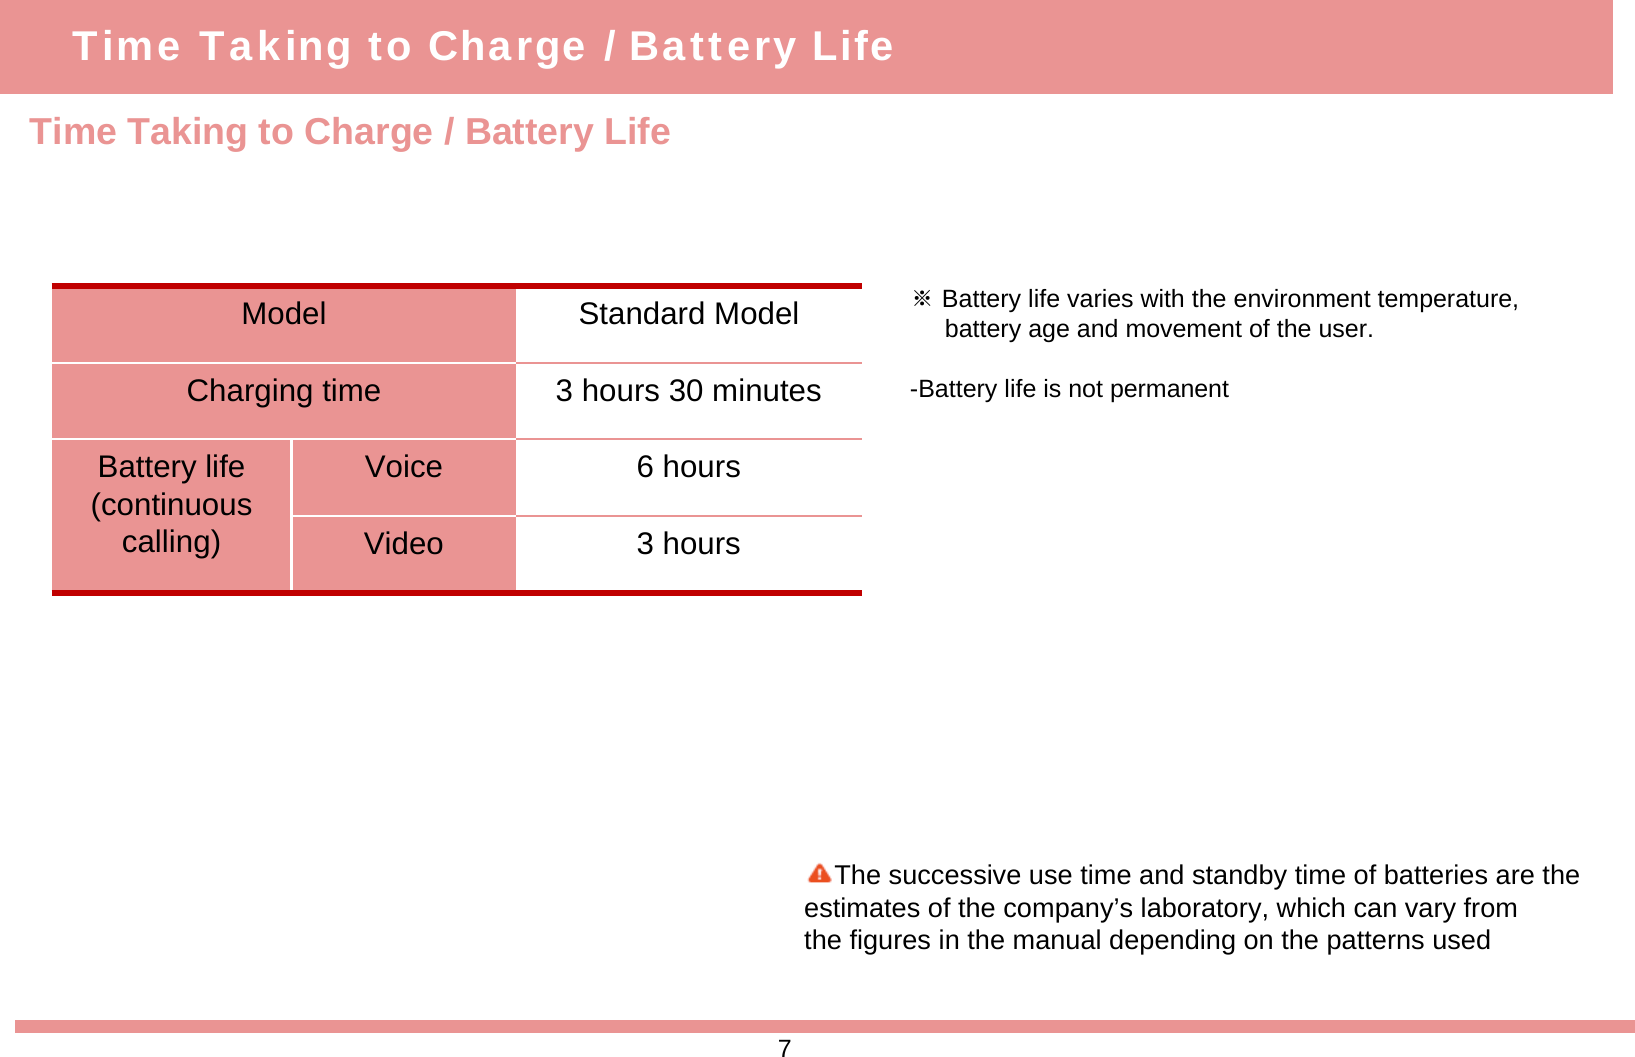 Time Taking to Charge / Battery Life※Battery life varies with the environment temperature, battery age and movement of the user. -Battery life is not permanentModel Standard ModelCharging time 3 hours 30 minutesBattery life (continuous calling)Voice 6 hoursVideo 3 hoursTime Taking to Charge / Battery LifeThe successive use time and standby time of batteries are the estimates of the company’s laboratory, which can vary from the figures in the manual depending on the patterns used7